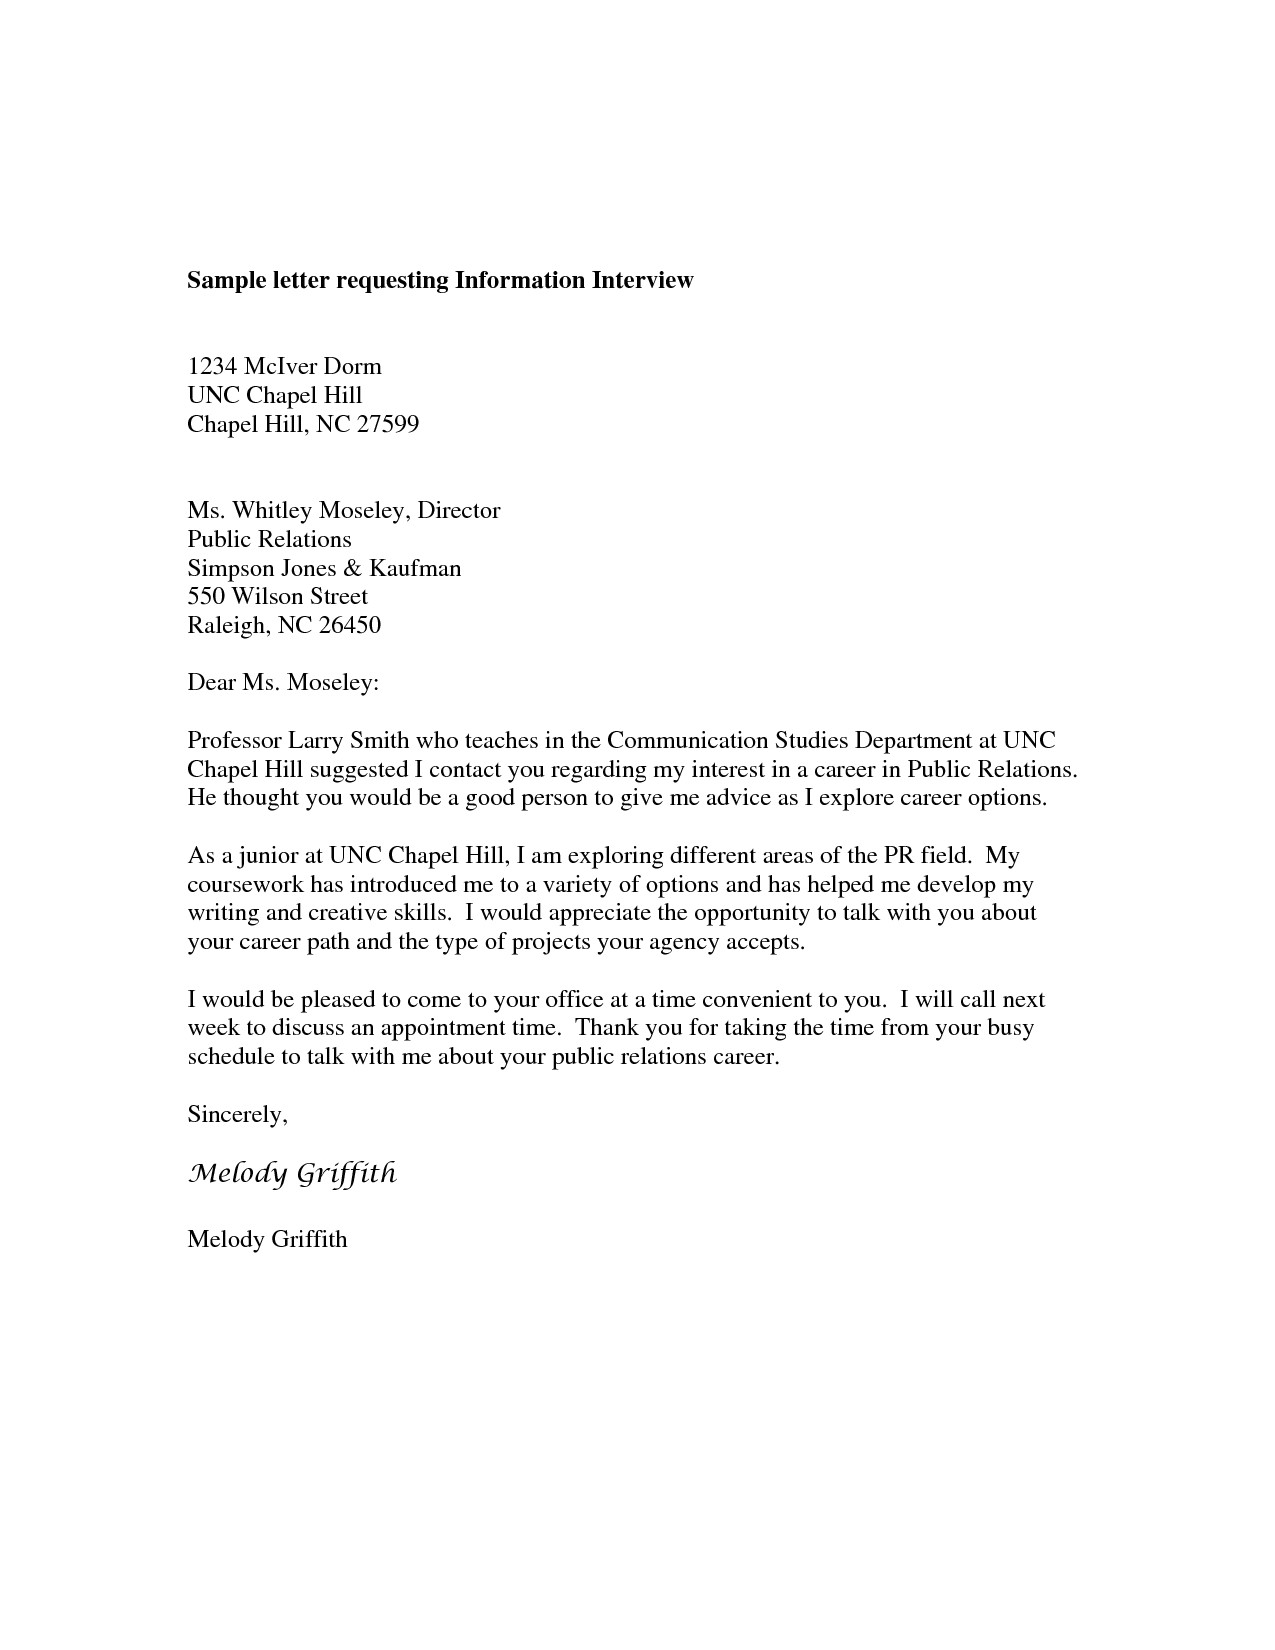 business letter asking for job interview